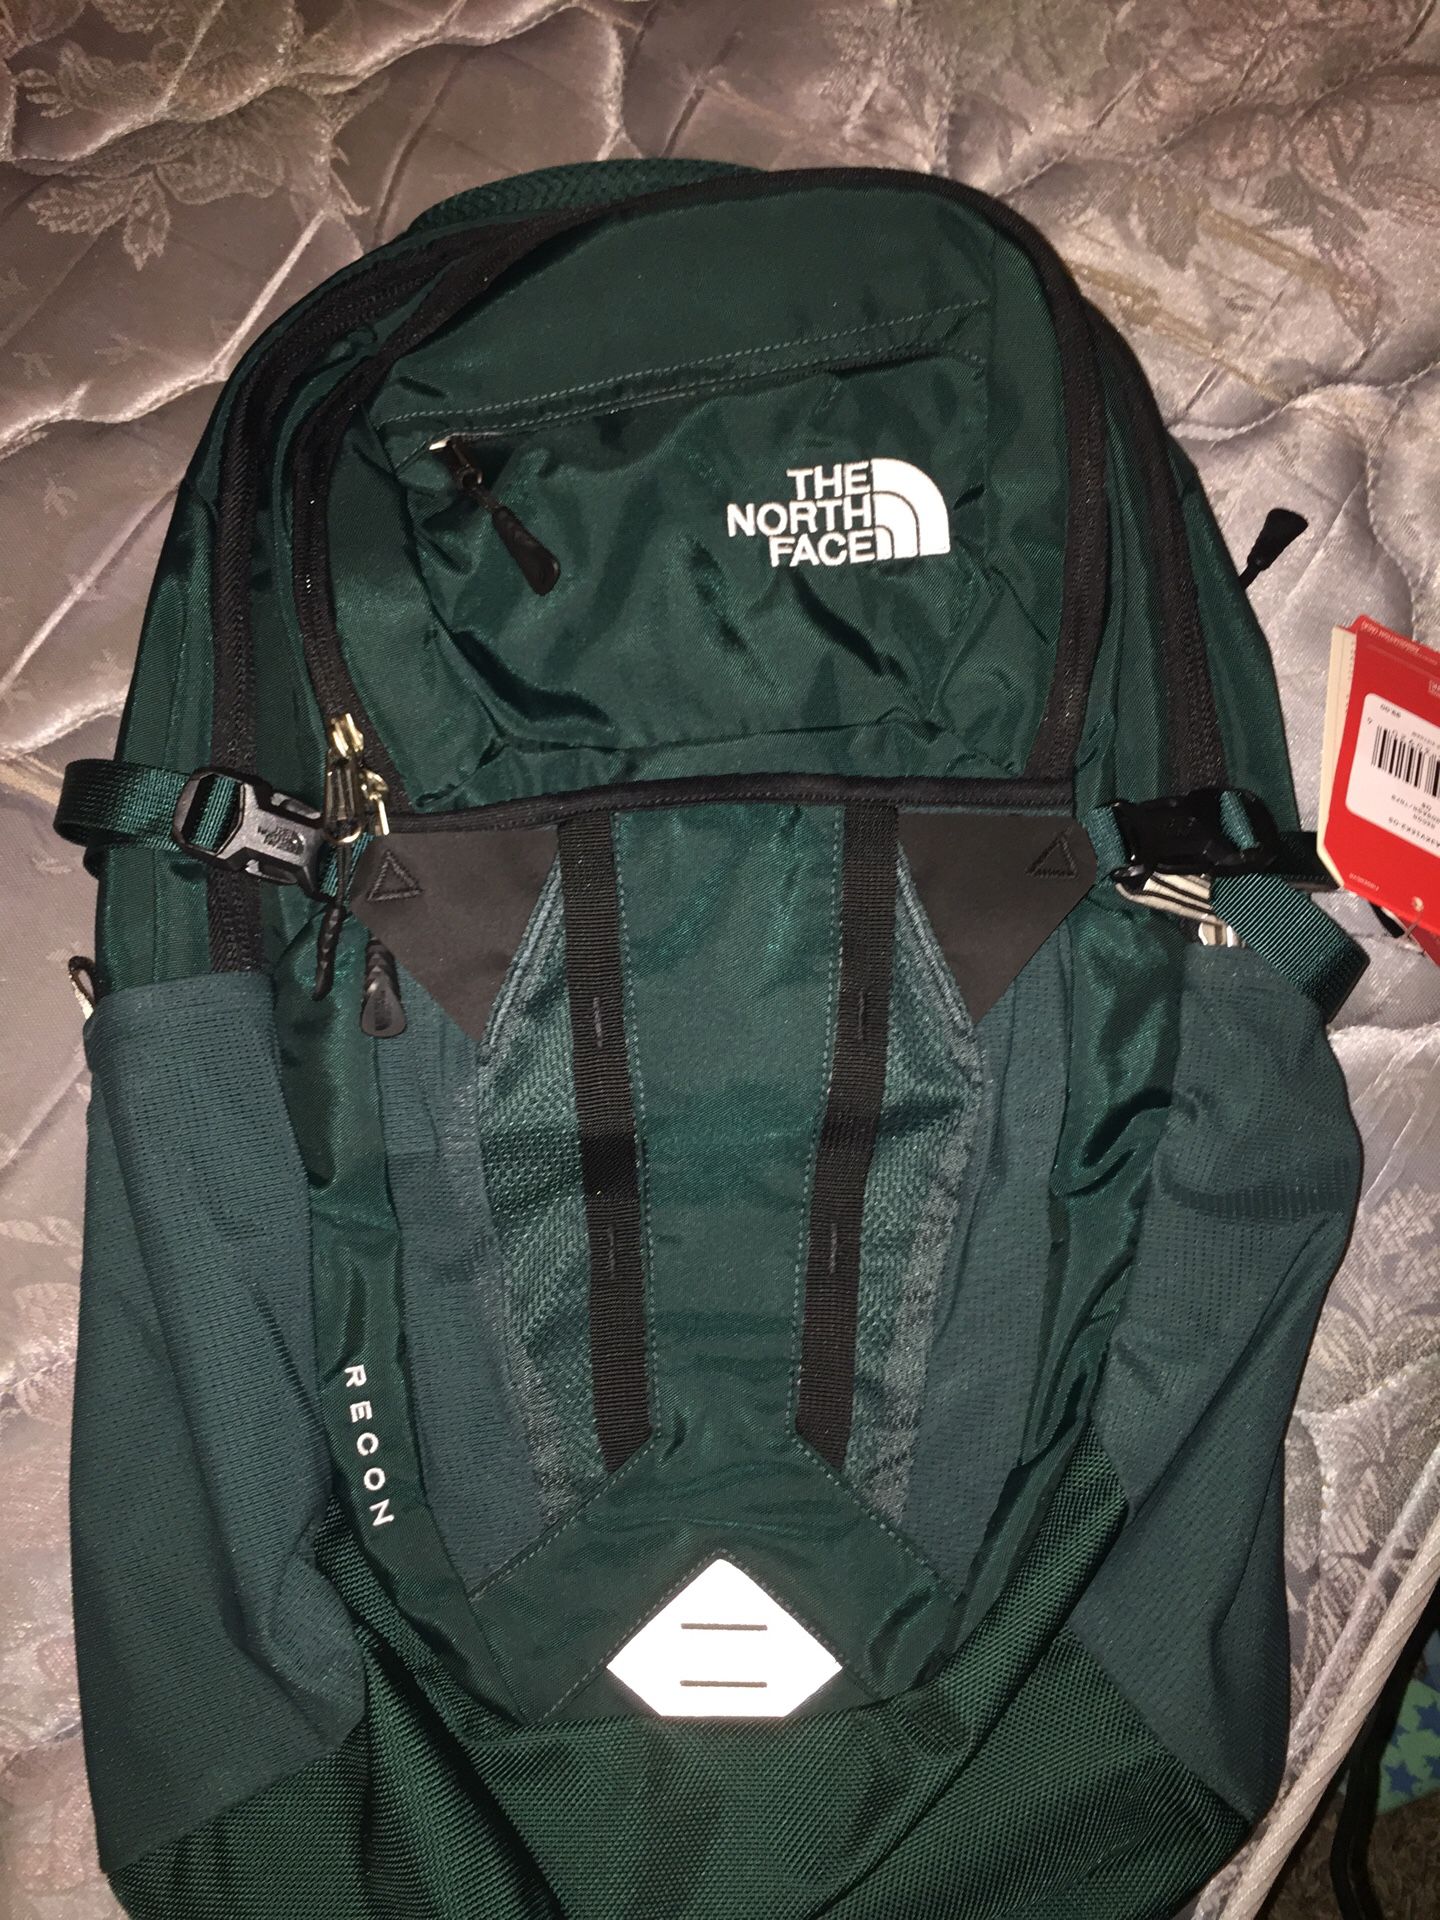 Brand new recon emerald green colored north face backpack